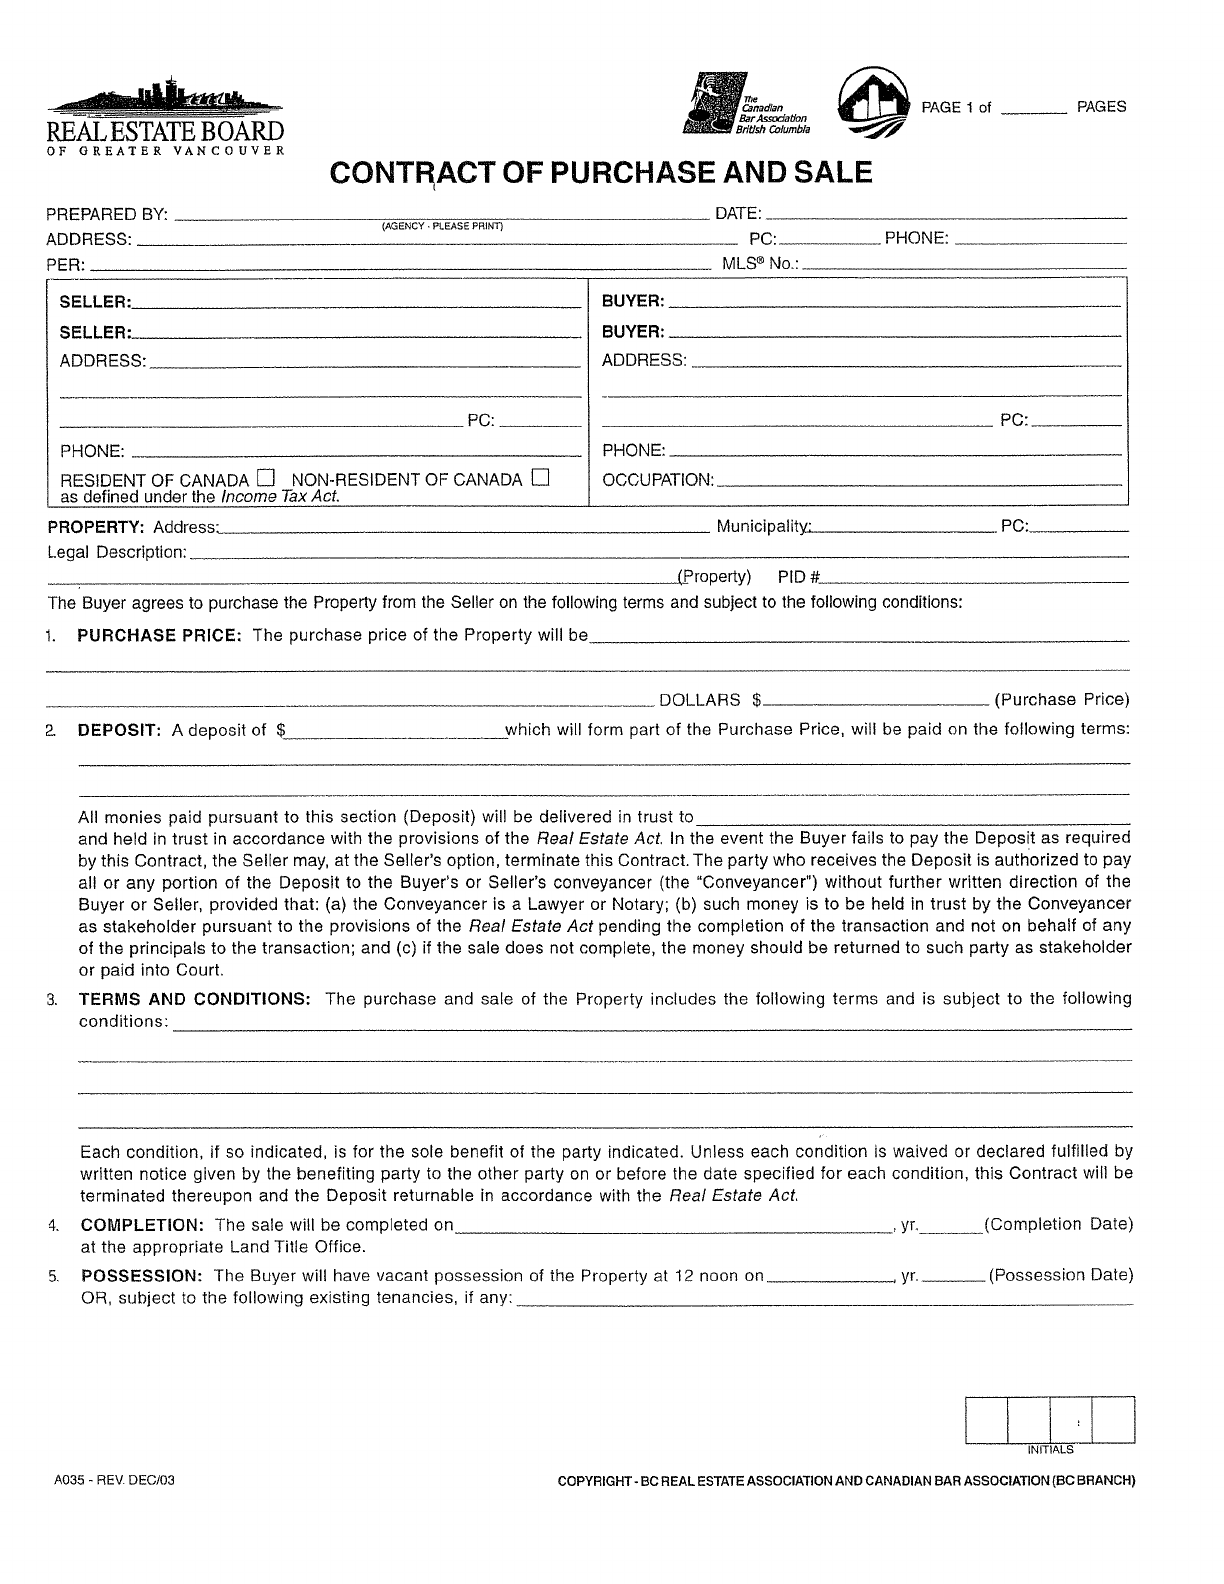 British Columbia Contract of Purchase and Sale Form 1